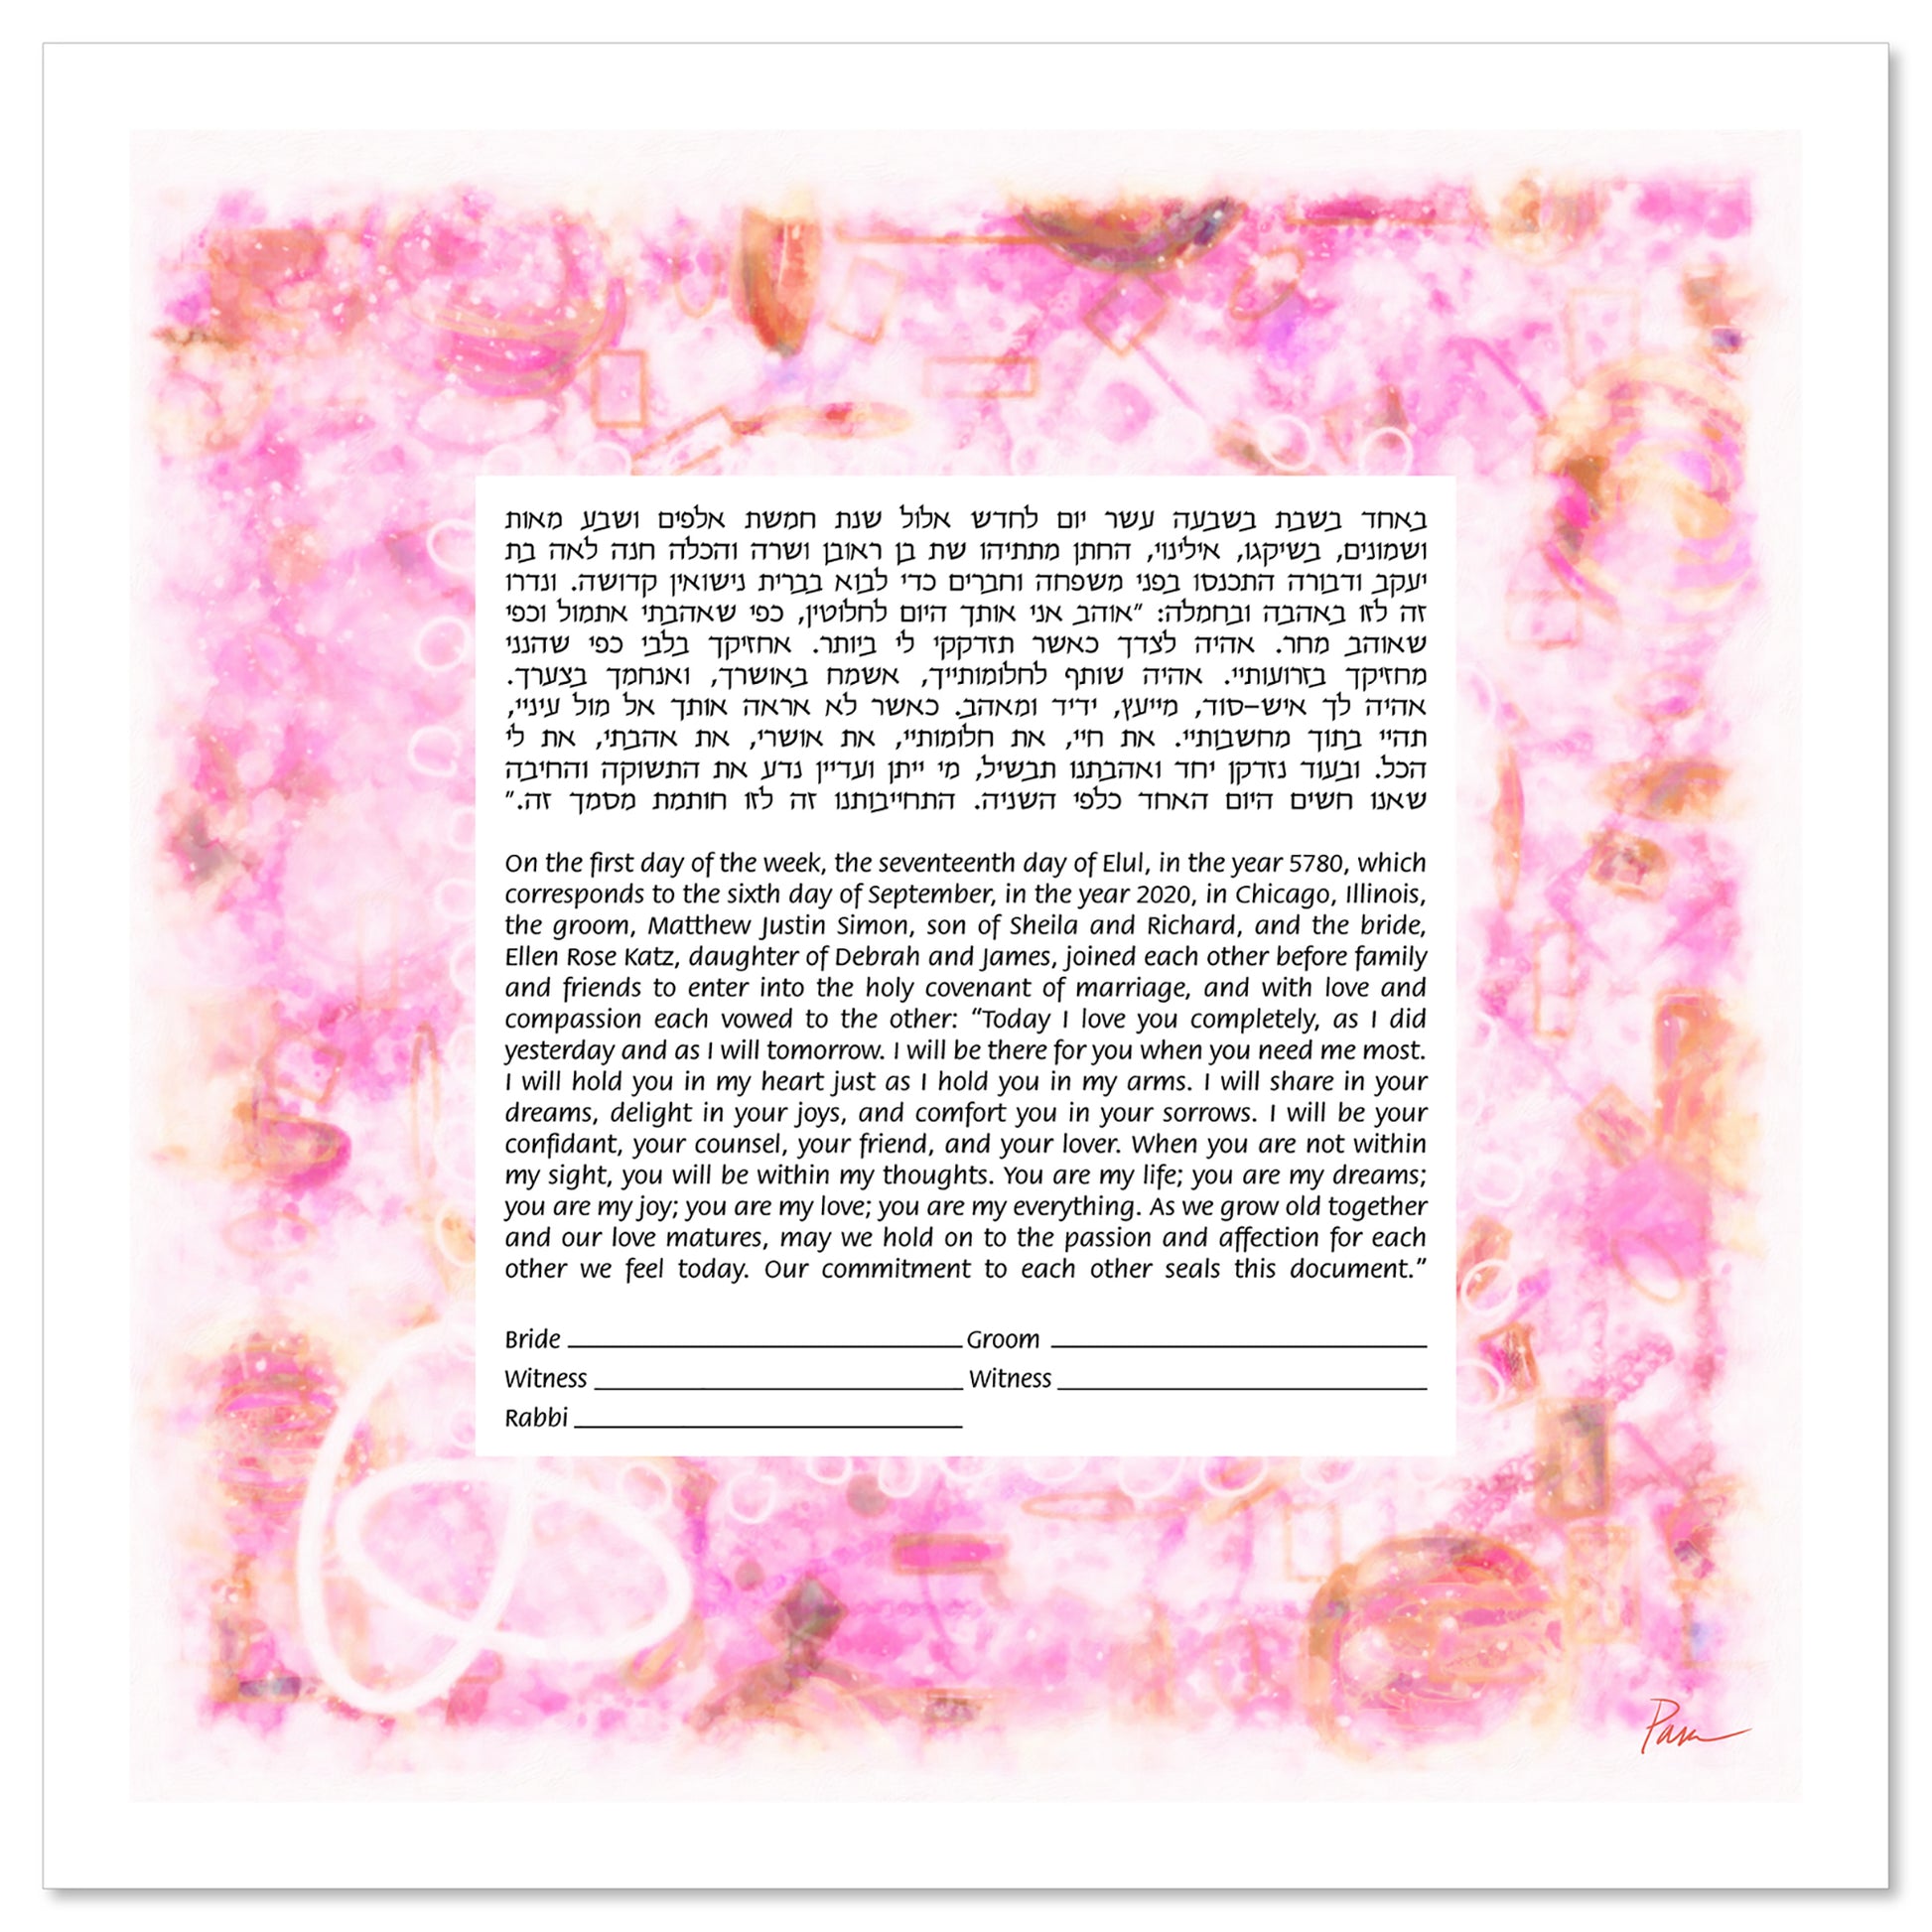 Galaxy Bands Rose ketubah by Pam Parker features a square text surrounded by mid-century modern shapes over a rose-colored background.